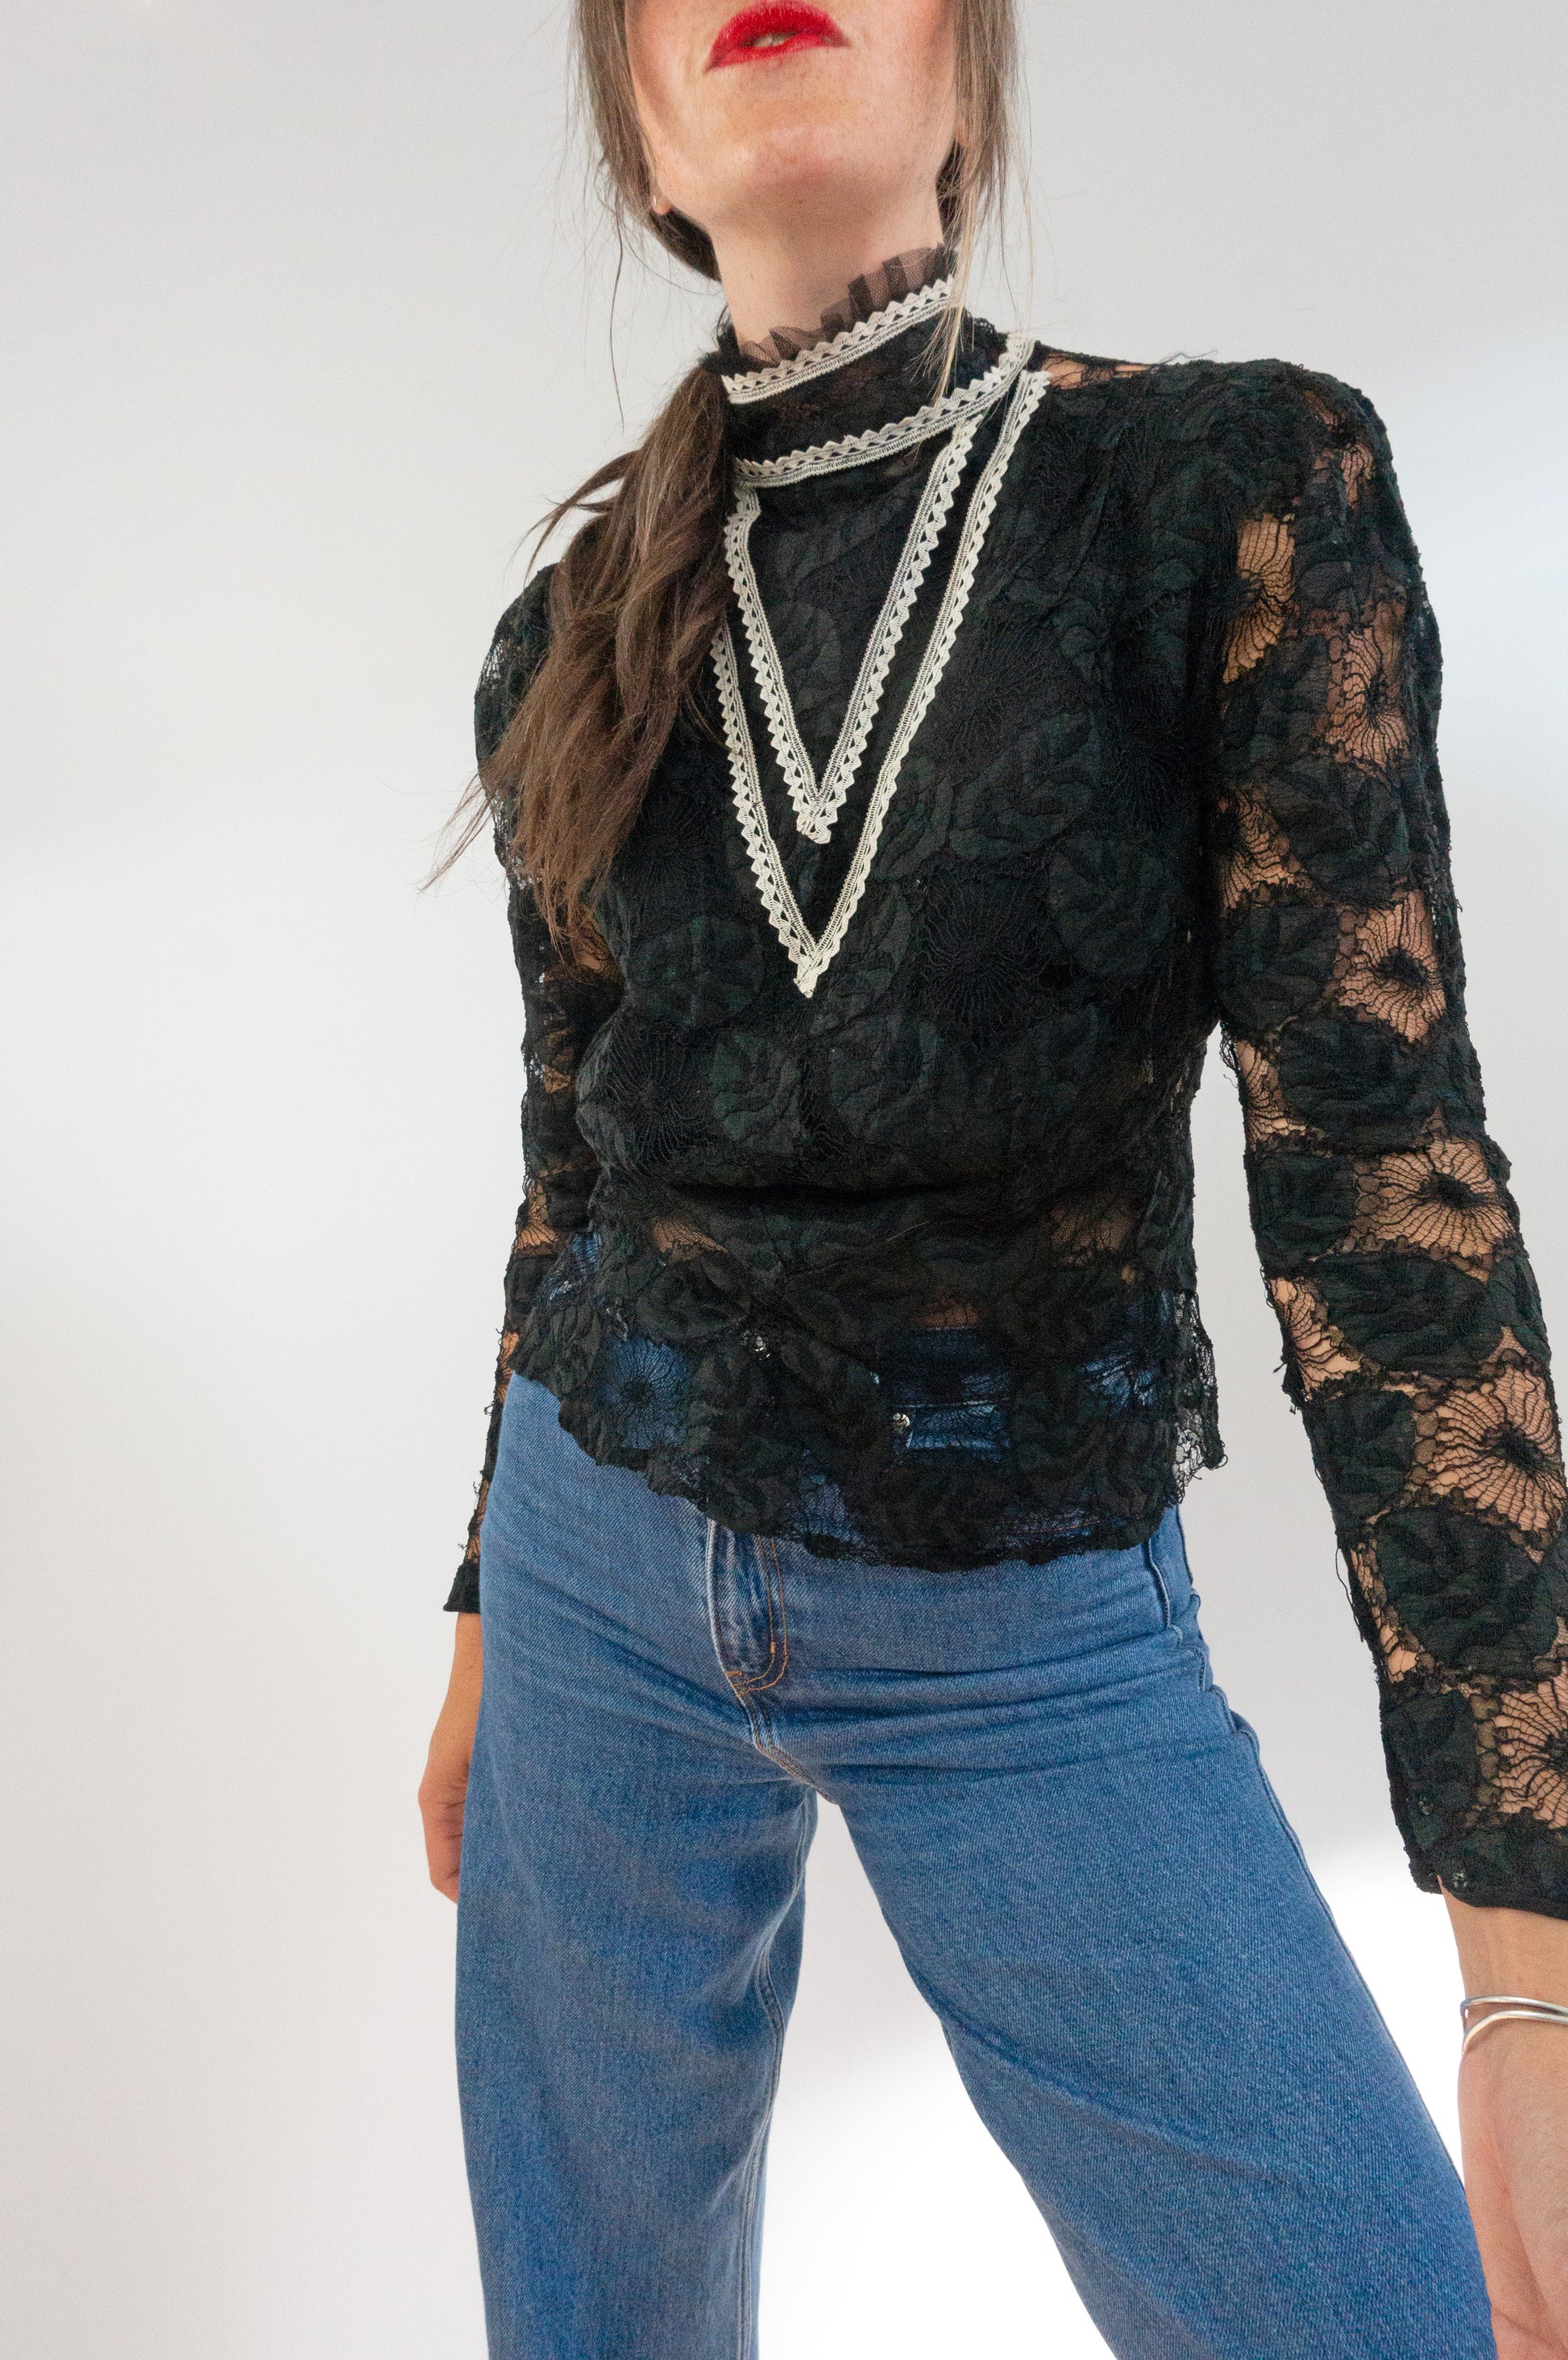 Victorian Ruffle Neck Sheer Black Lace Blouse